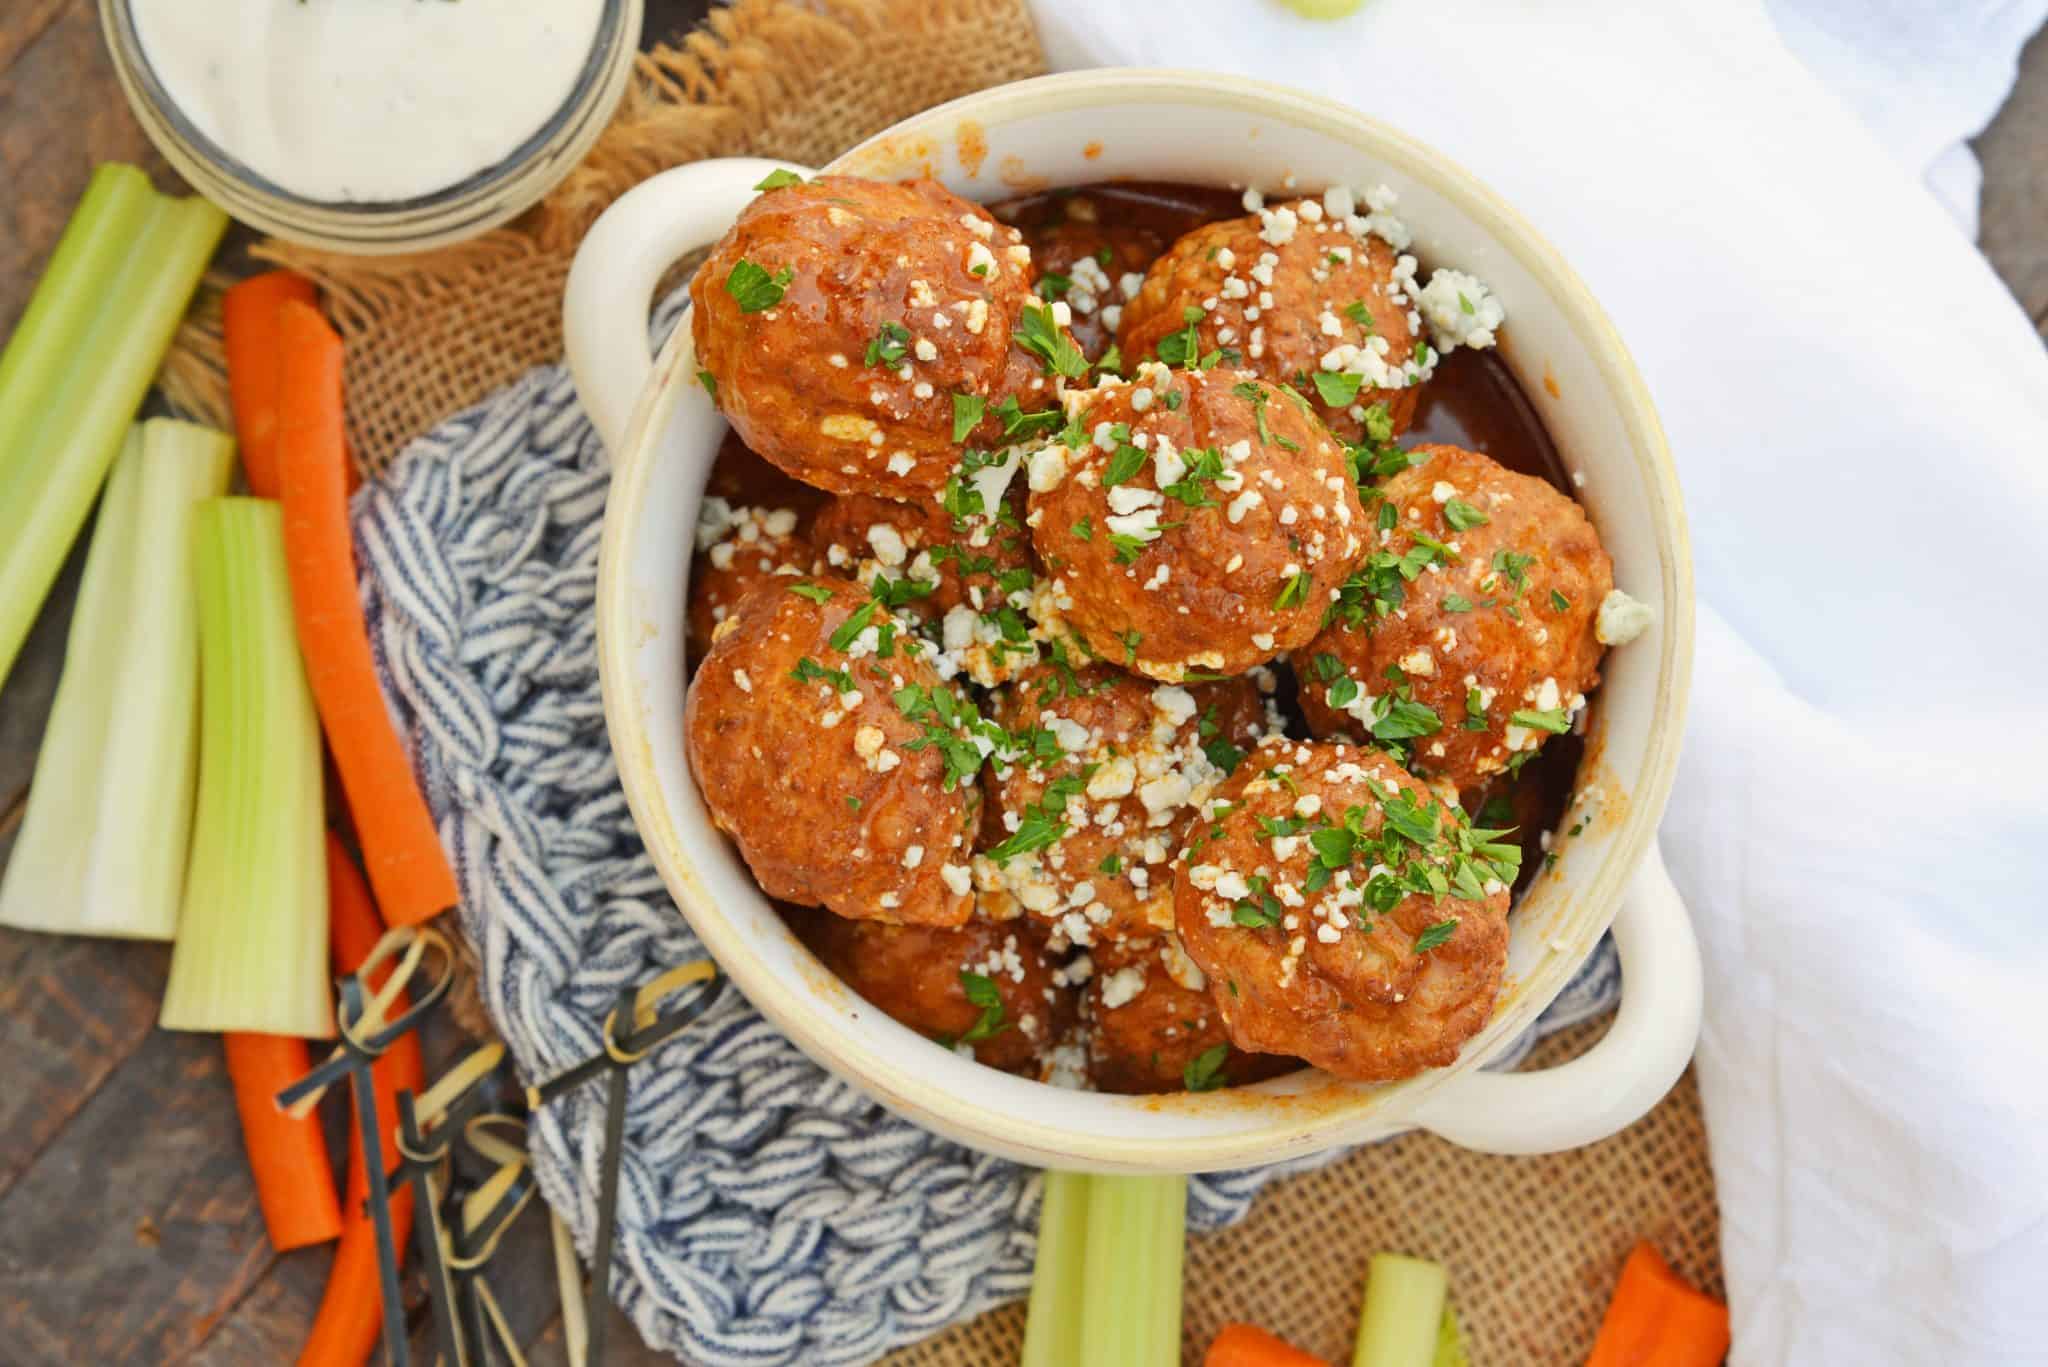 Buffalo Chicken Meatballs are a quick and easy appetizer that will spice up any party! Simmered in spicy wing sauce and blue cheese, these will be a winner! #buffalochicken #partymeatballs #buffalochickenmeatballs www.savoryexperiments.com